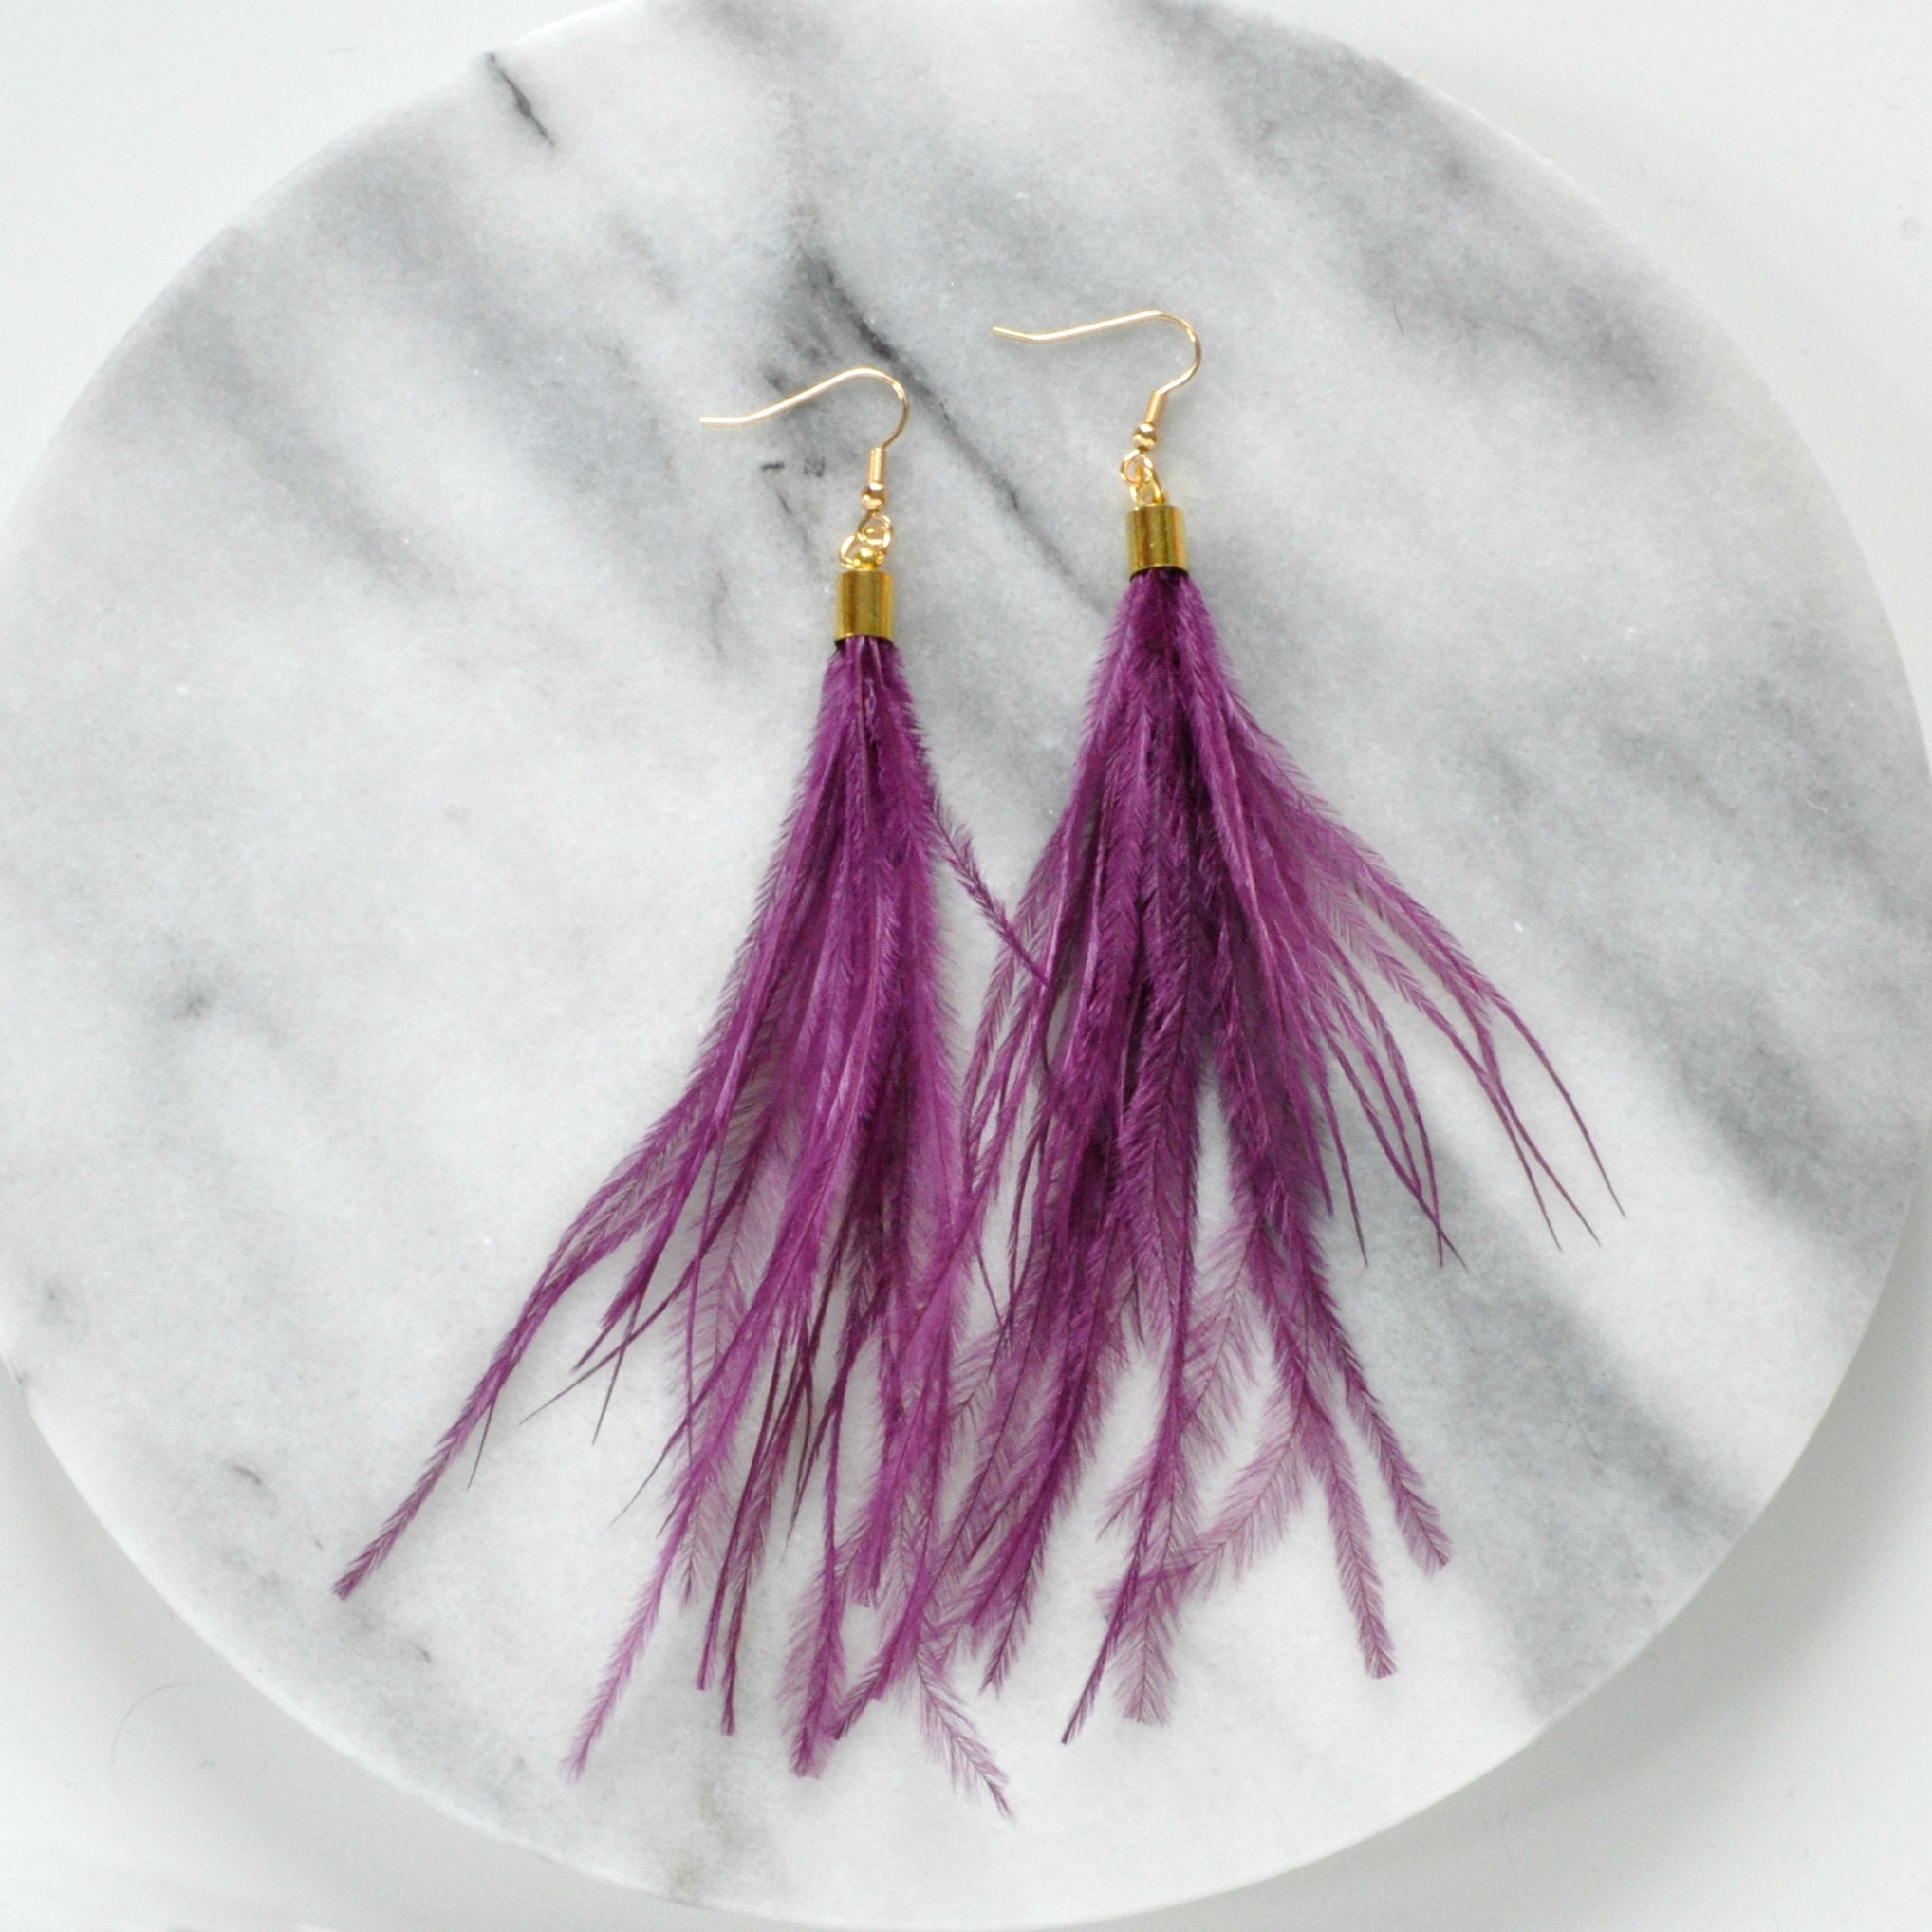 Libby & Smee Purple Feather Earrings with Ostrich feathers and gold caps, still life